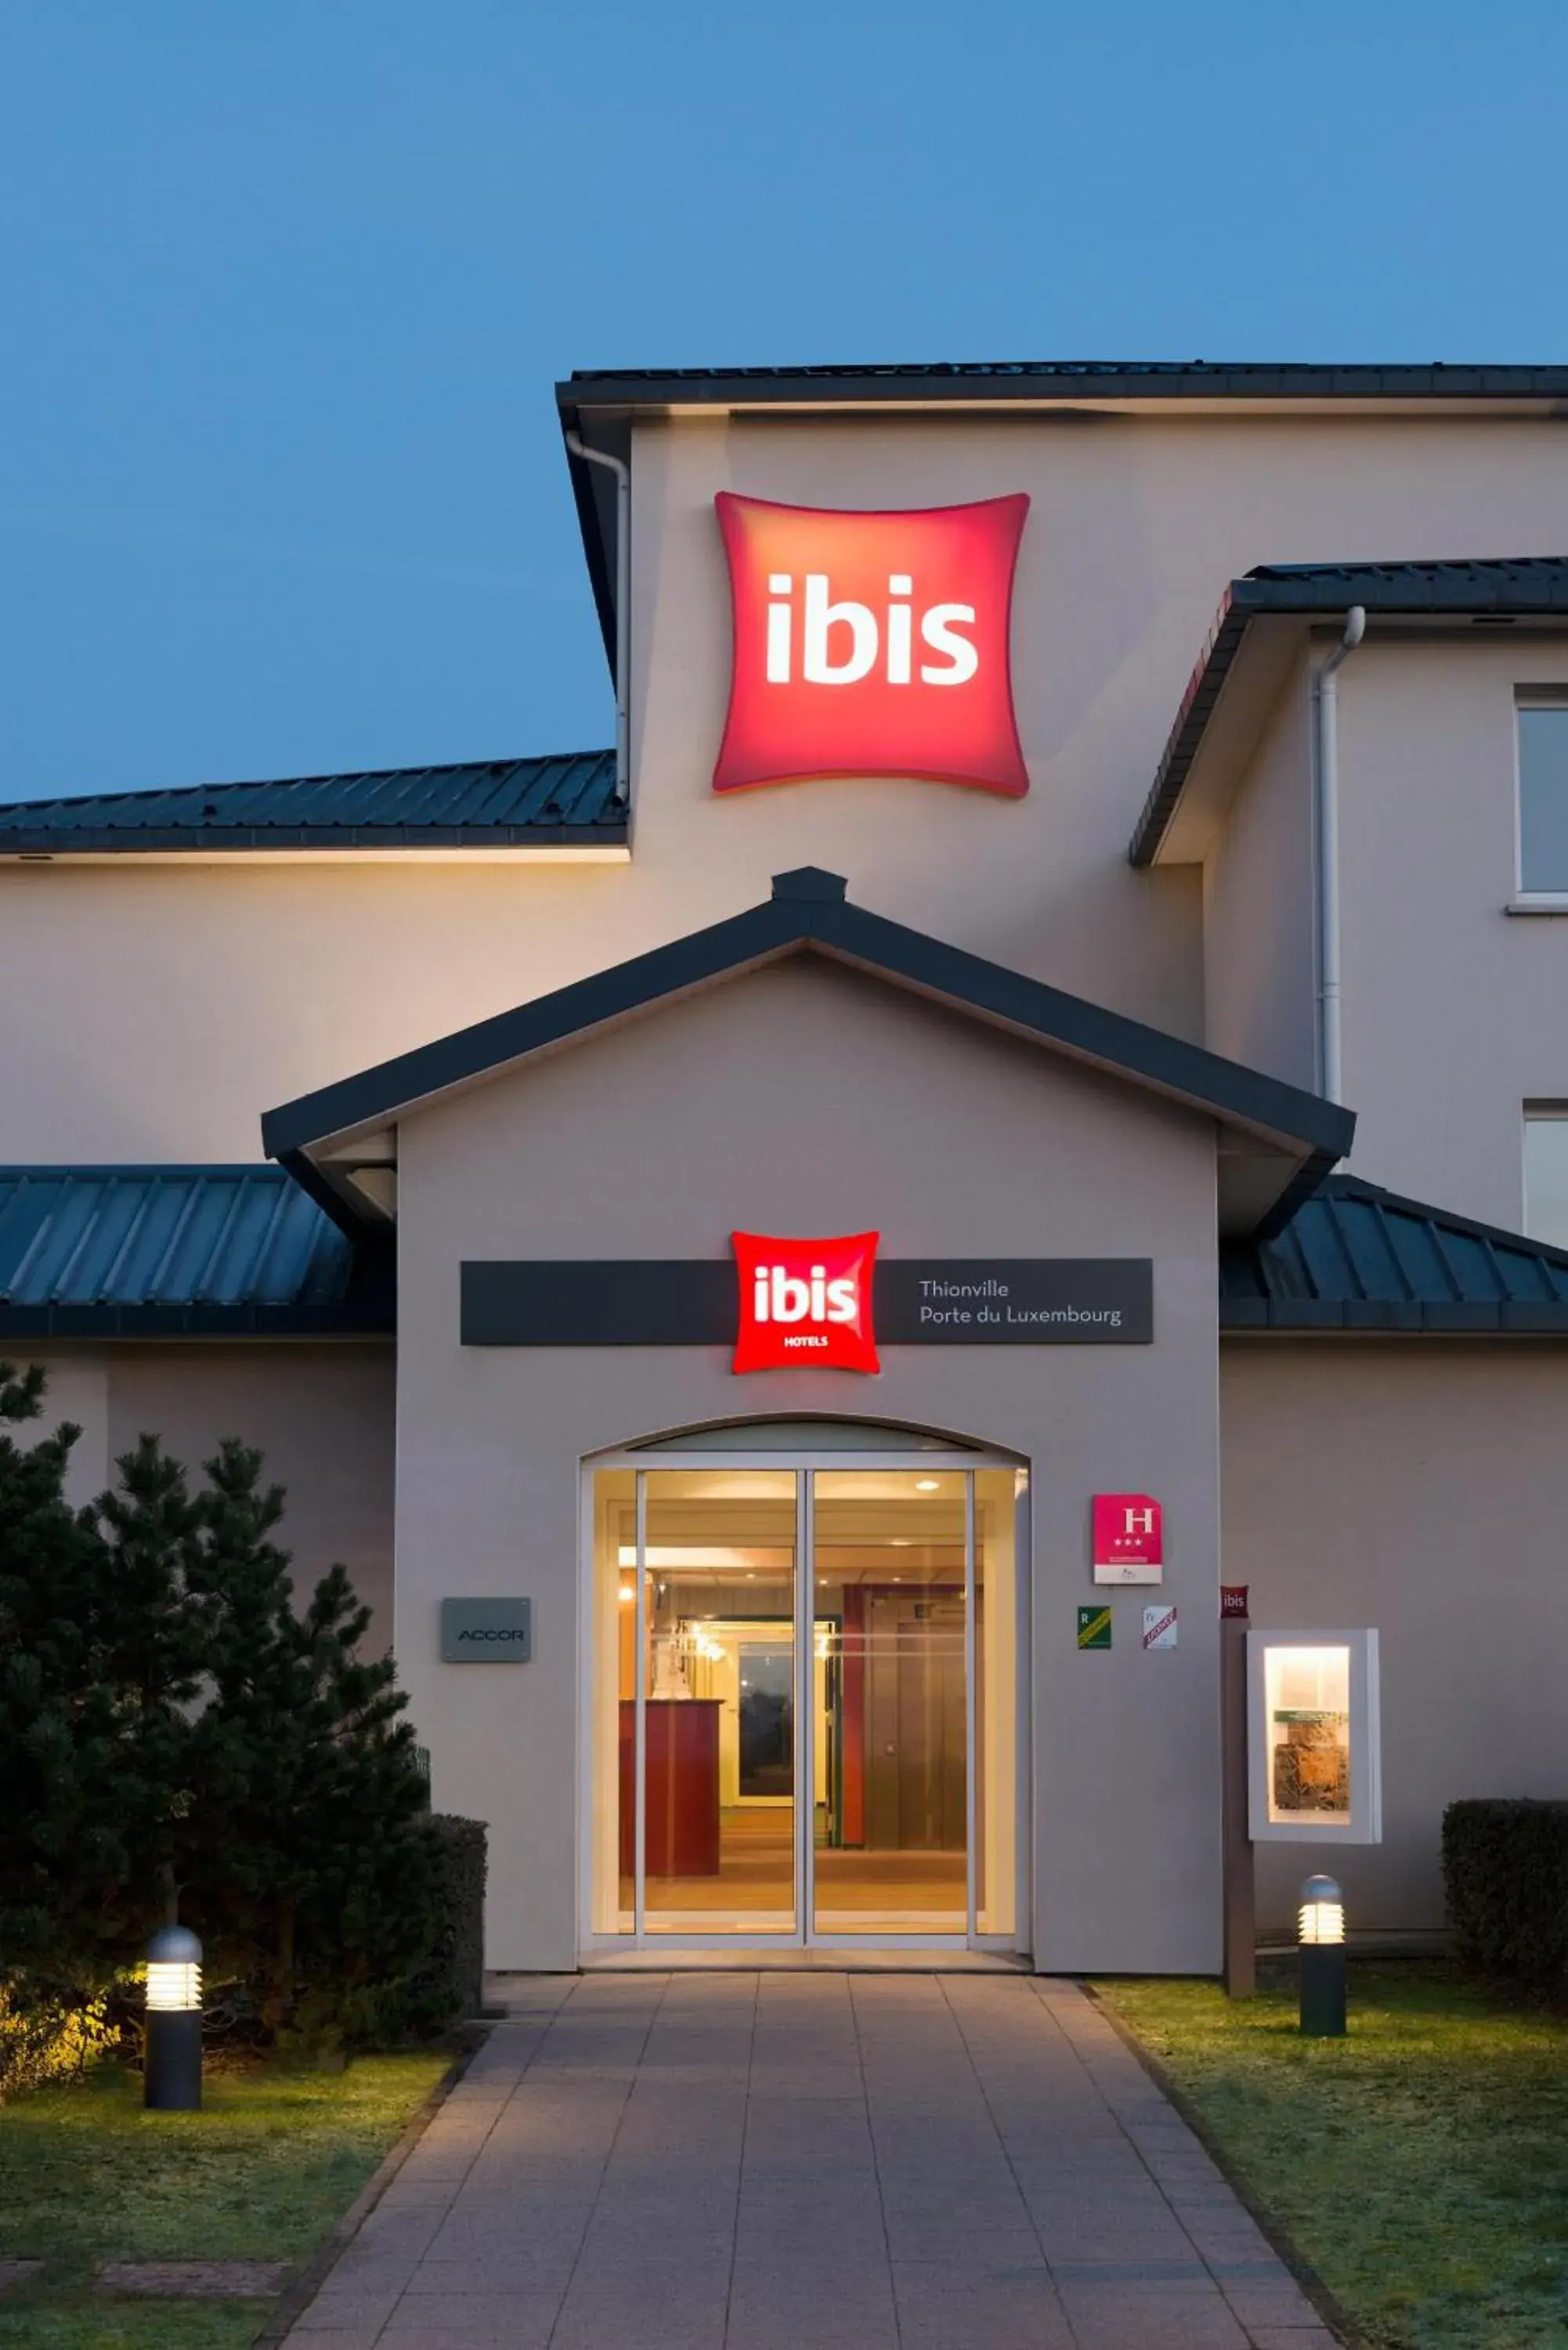 Property Building in ibis Thionville Porte du Luxembourg